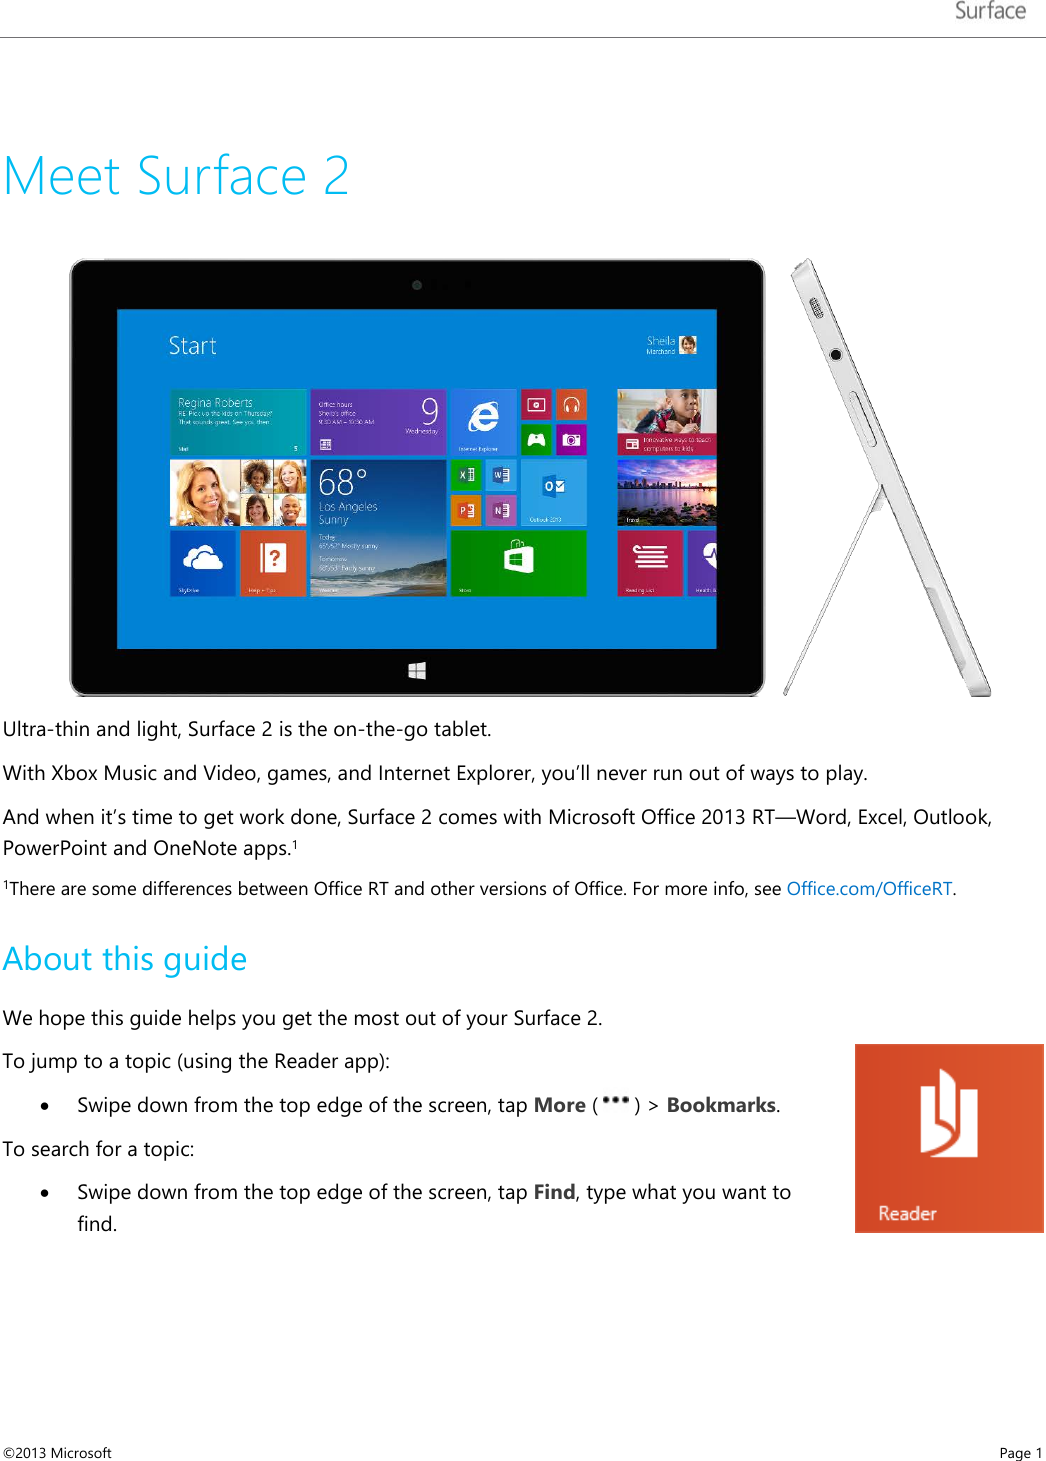   Meet Surface 2  Ultra-thin and light, Surface 2 is the on-the-go tablet.   With Xbox Music and Video, games, and Internet Explorer, you’ll never run out of ways to play.  And when it’s time to get work done, Surface 2 comes with Microsoft Office 2013 RT—Word, Excel, Outlook, PowerPoint and OneNote apps.1  1There are some differences between Office RT and other versions of Office. For more info, see Office.com/OfficeRT.  About this guide We hope this guide helps you get the most out of your Surface 2.  To jump to a topic (using the Reader app): • Swipe down from the top edge of the screen, tap More (   ) &gt; Bookmarks. To search for a topic: • Swipe down from the top edge of the screen, tap Find, type what you want to find.  ©2013 Microsoft    Page 1  